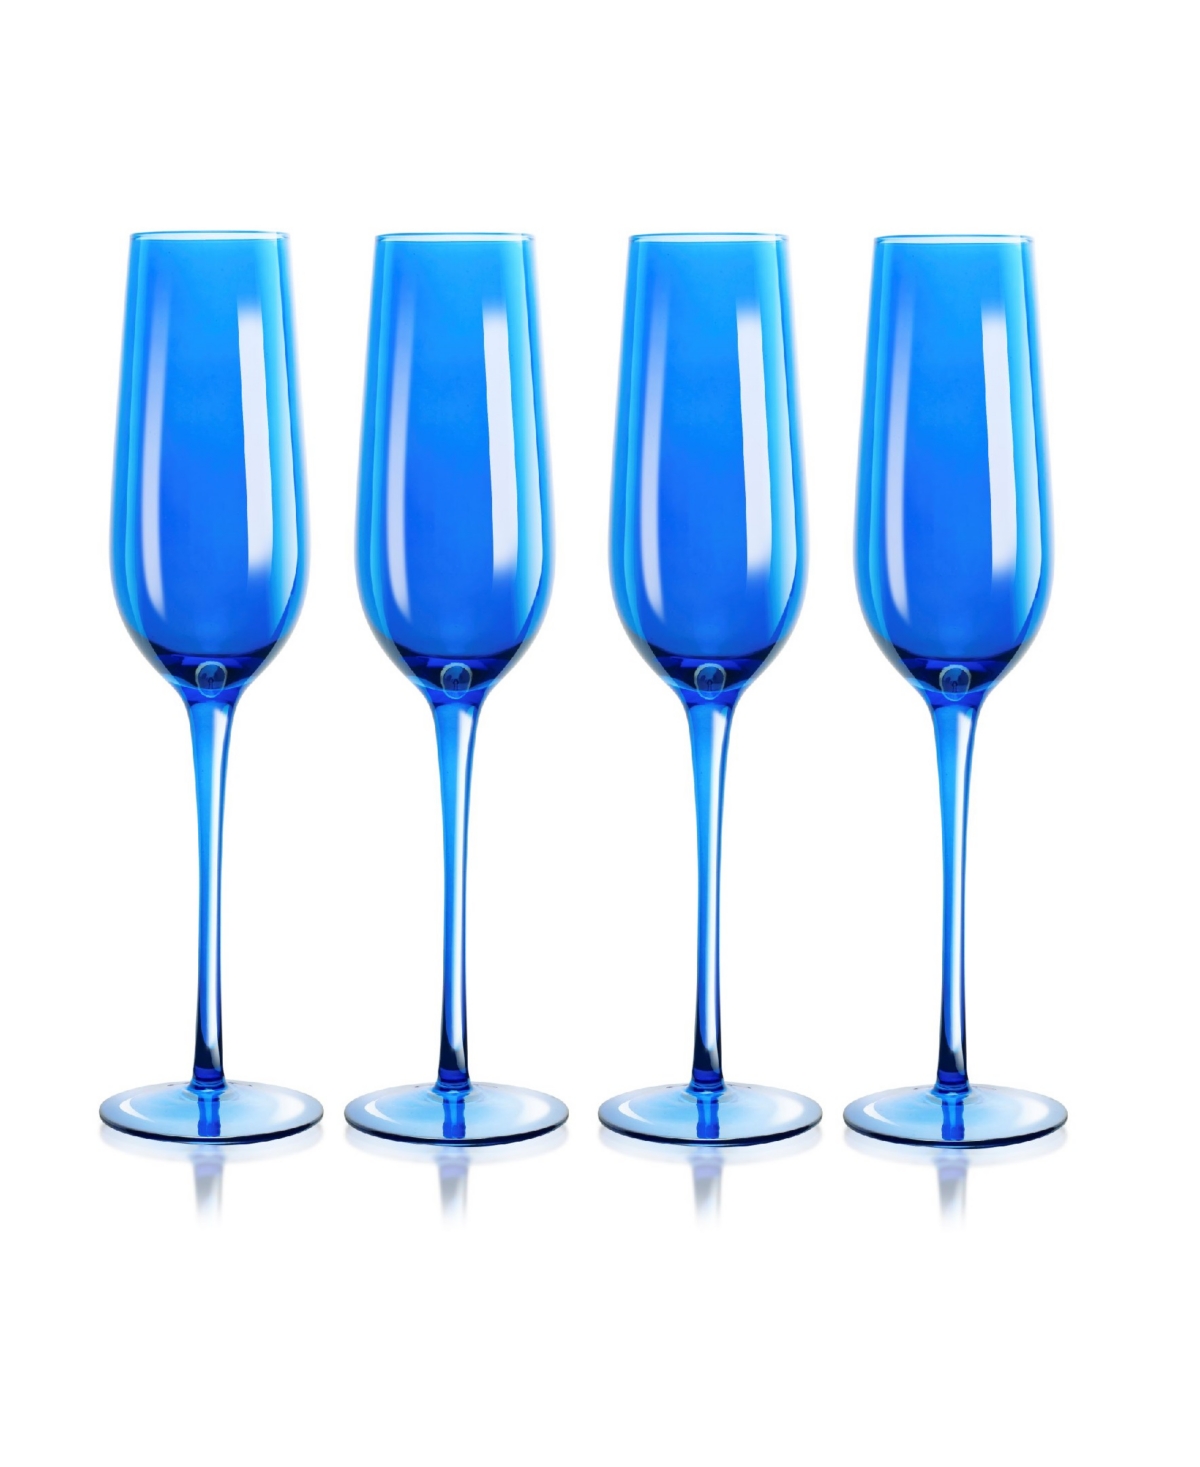 Qualia Glass Carnival Champagne Flutes, Set Of 4 In Blue